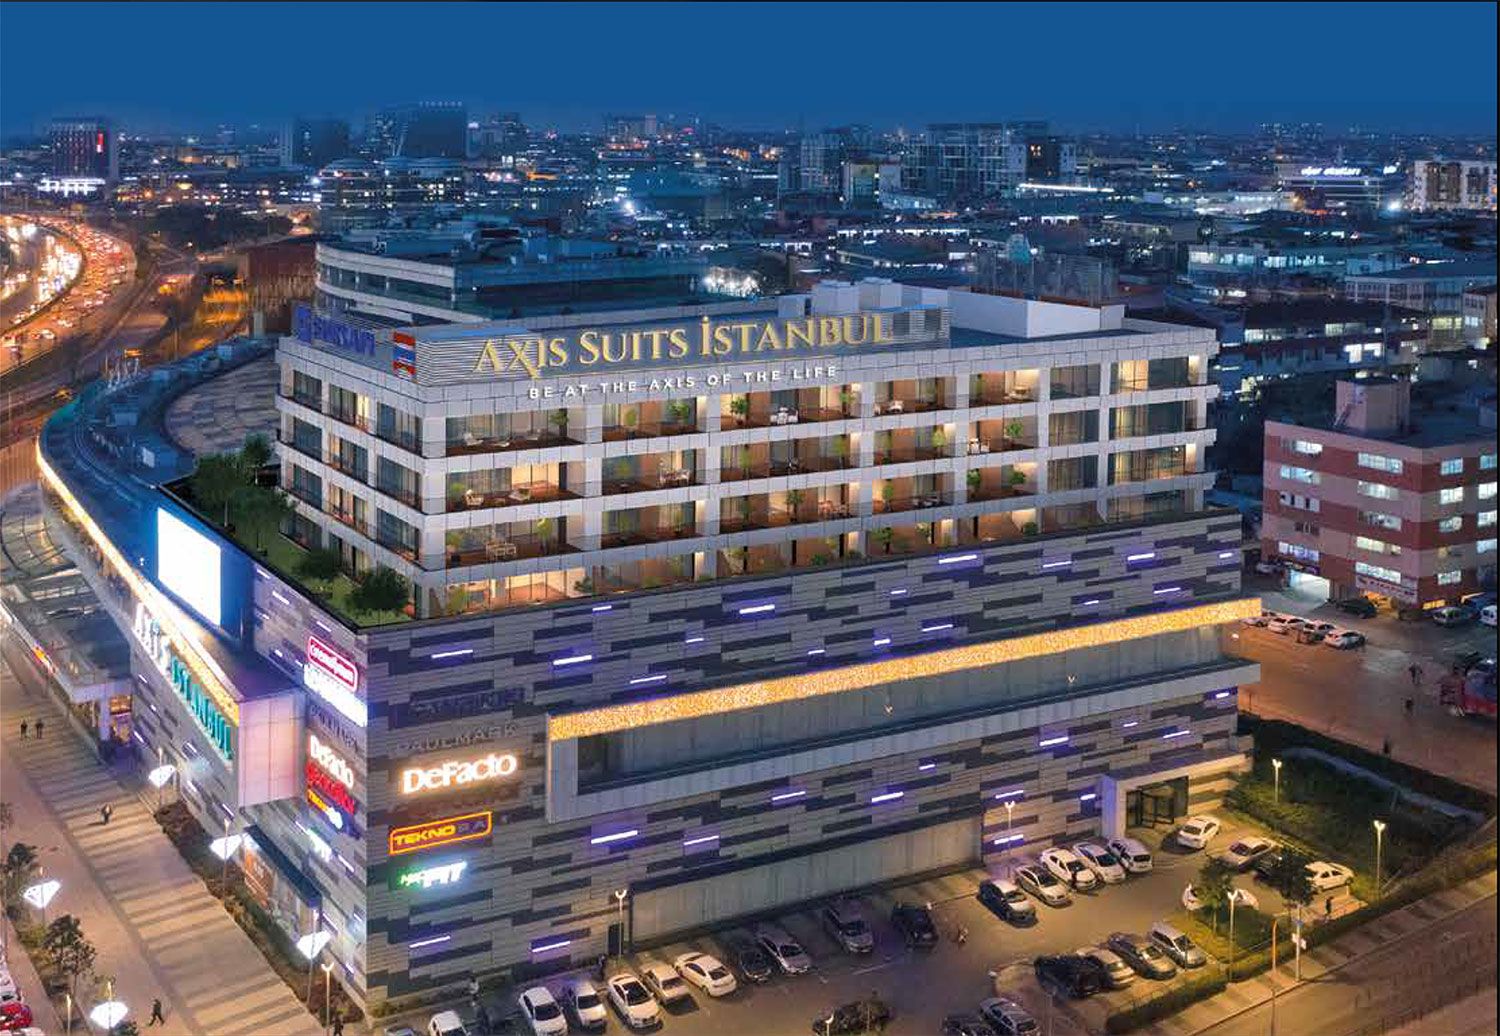 Axis Suites İstanbul